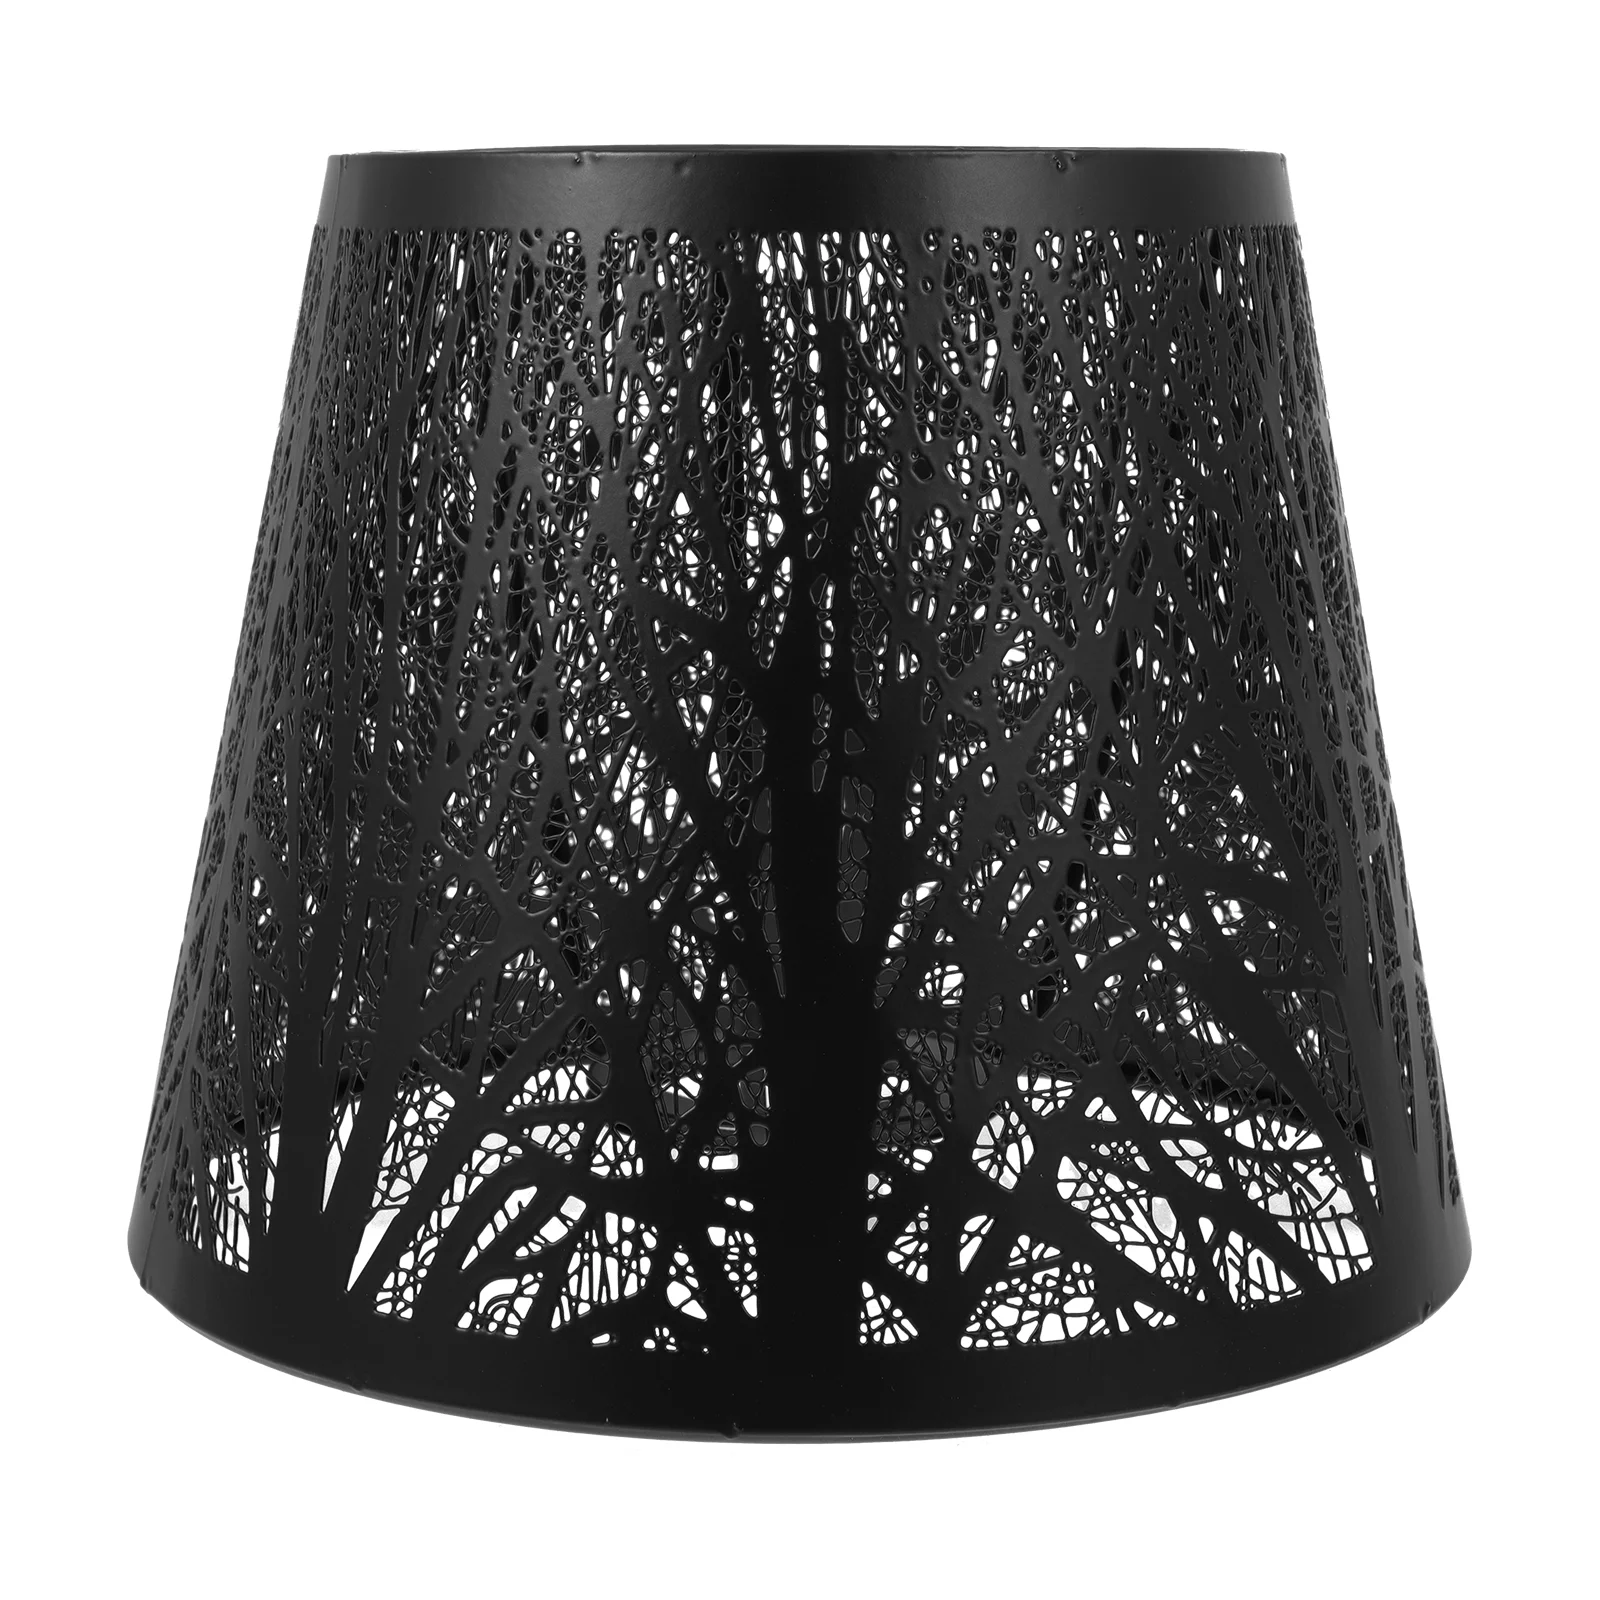 Lamp Shade Lampshade Cover Gothic Clipfloor Metal Tabletreespattern Tree Lampshades Black Bulb Replacement Lamps Small